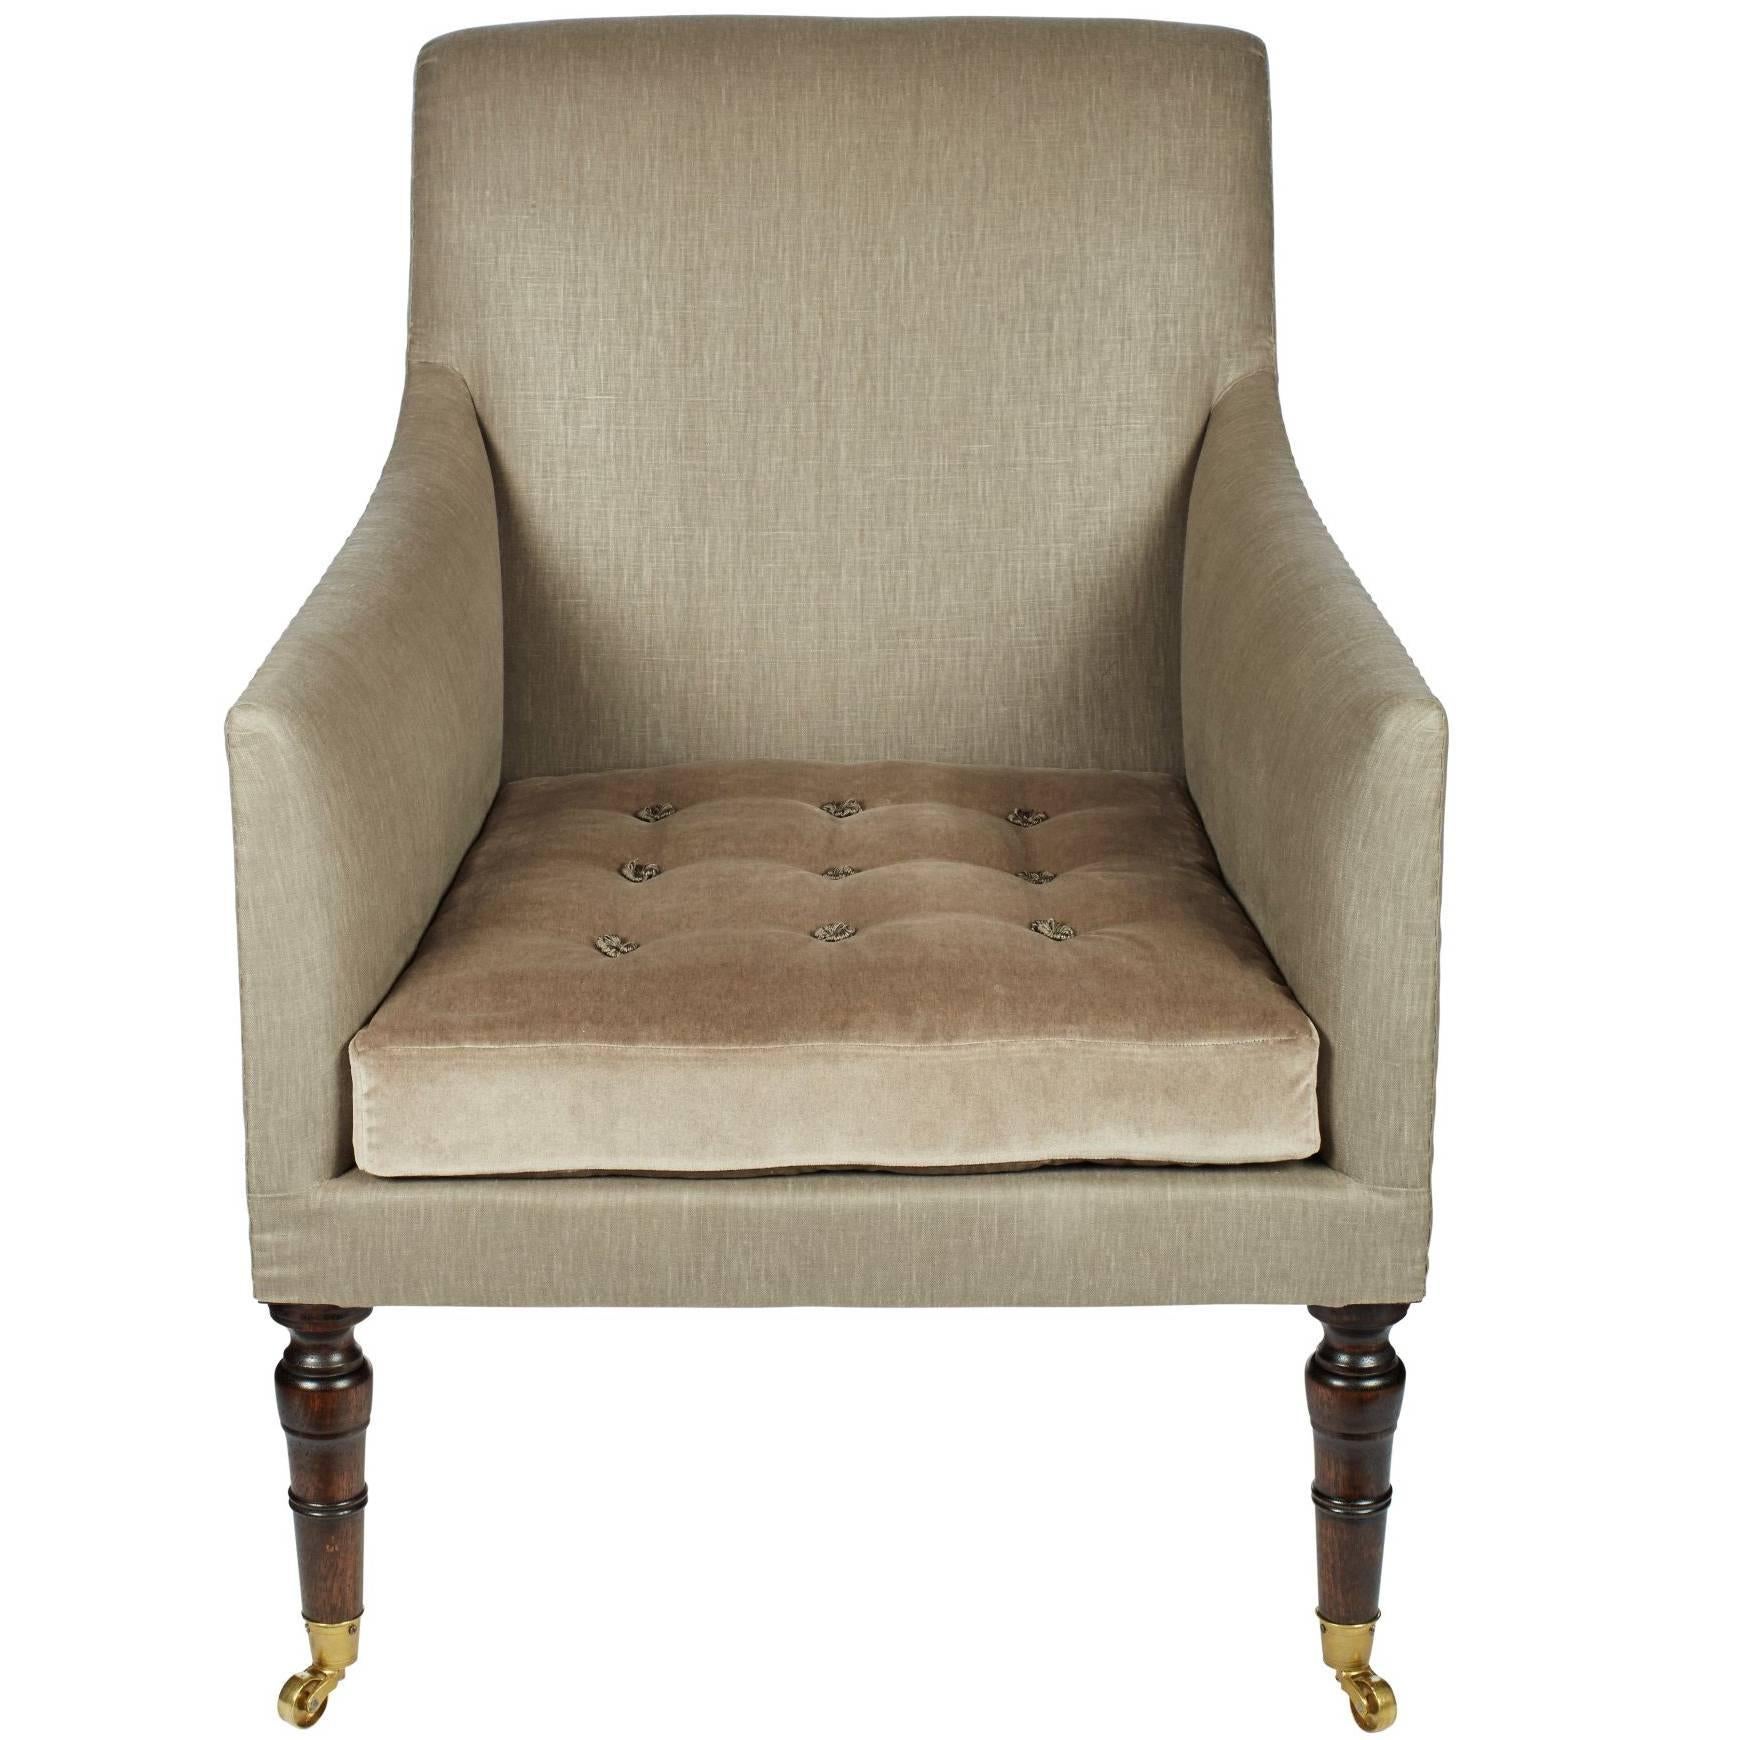 'Hope' Library Chair by Ensemblier, Custom-Made and Upholstered For Sale